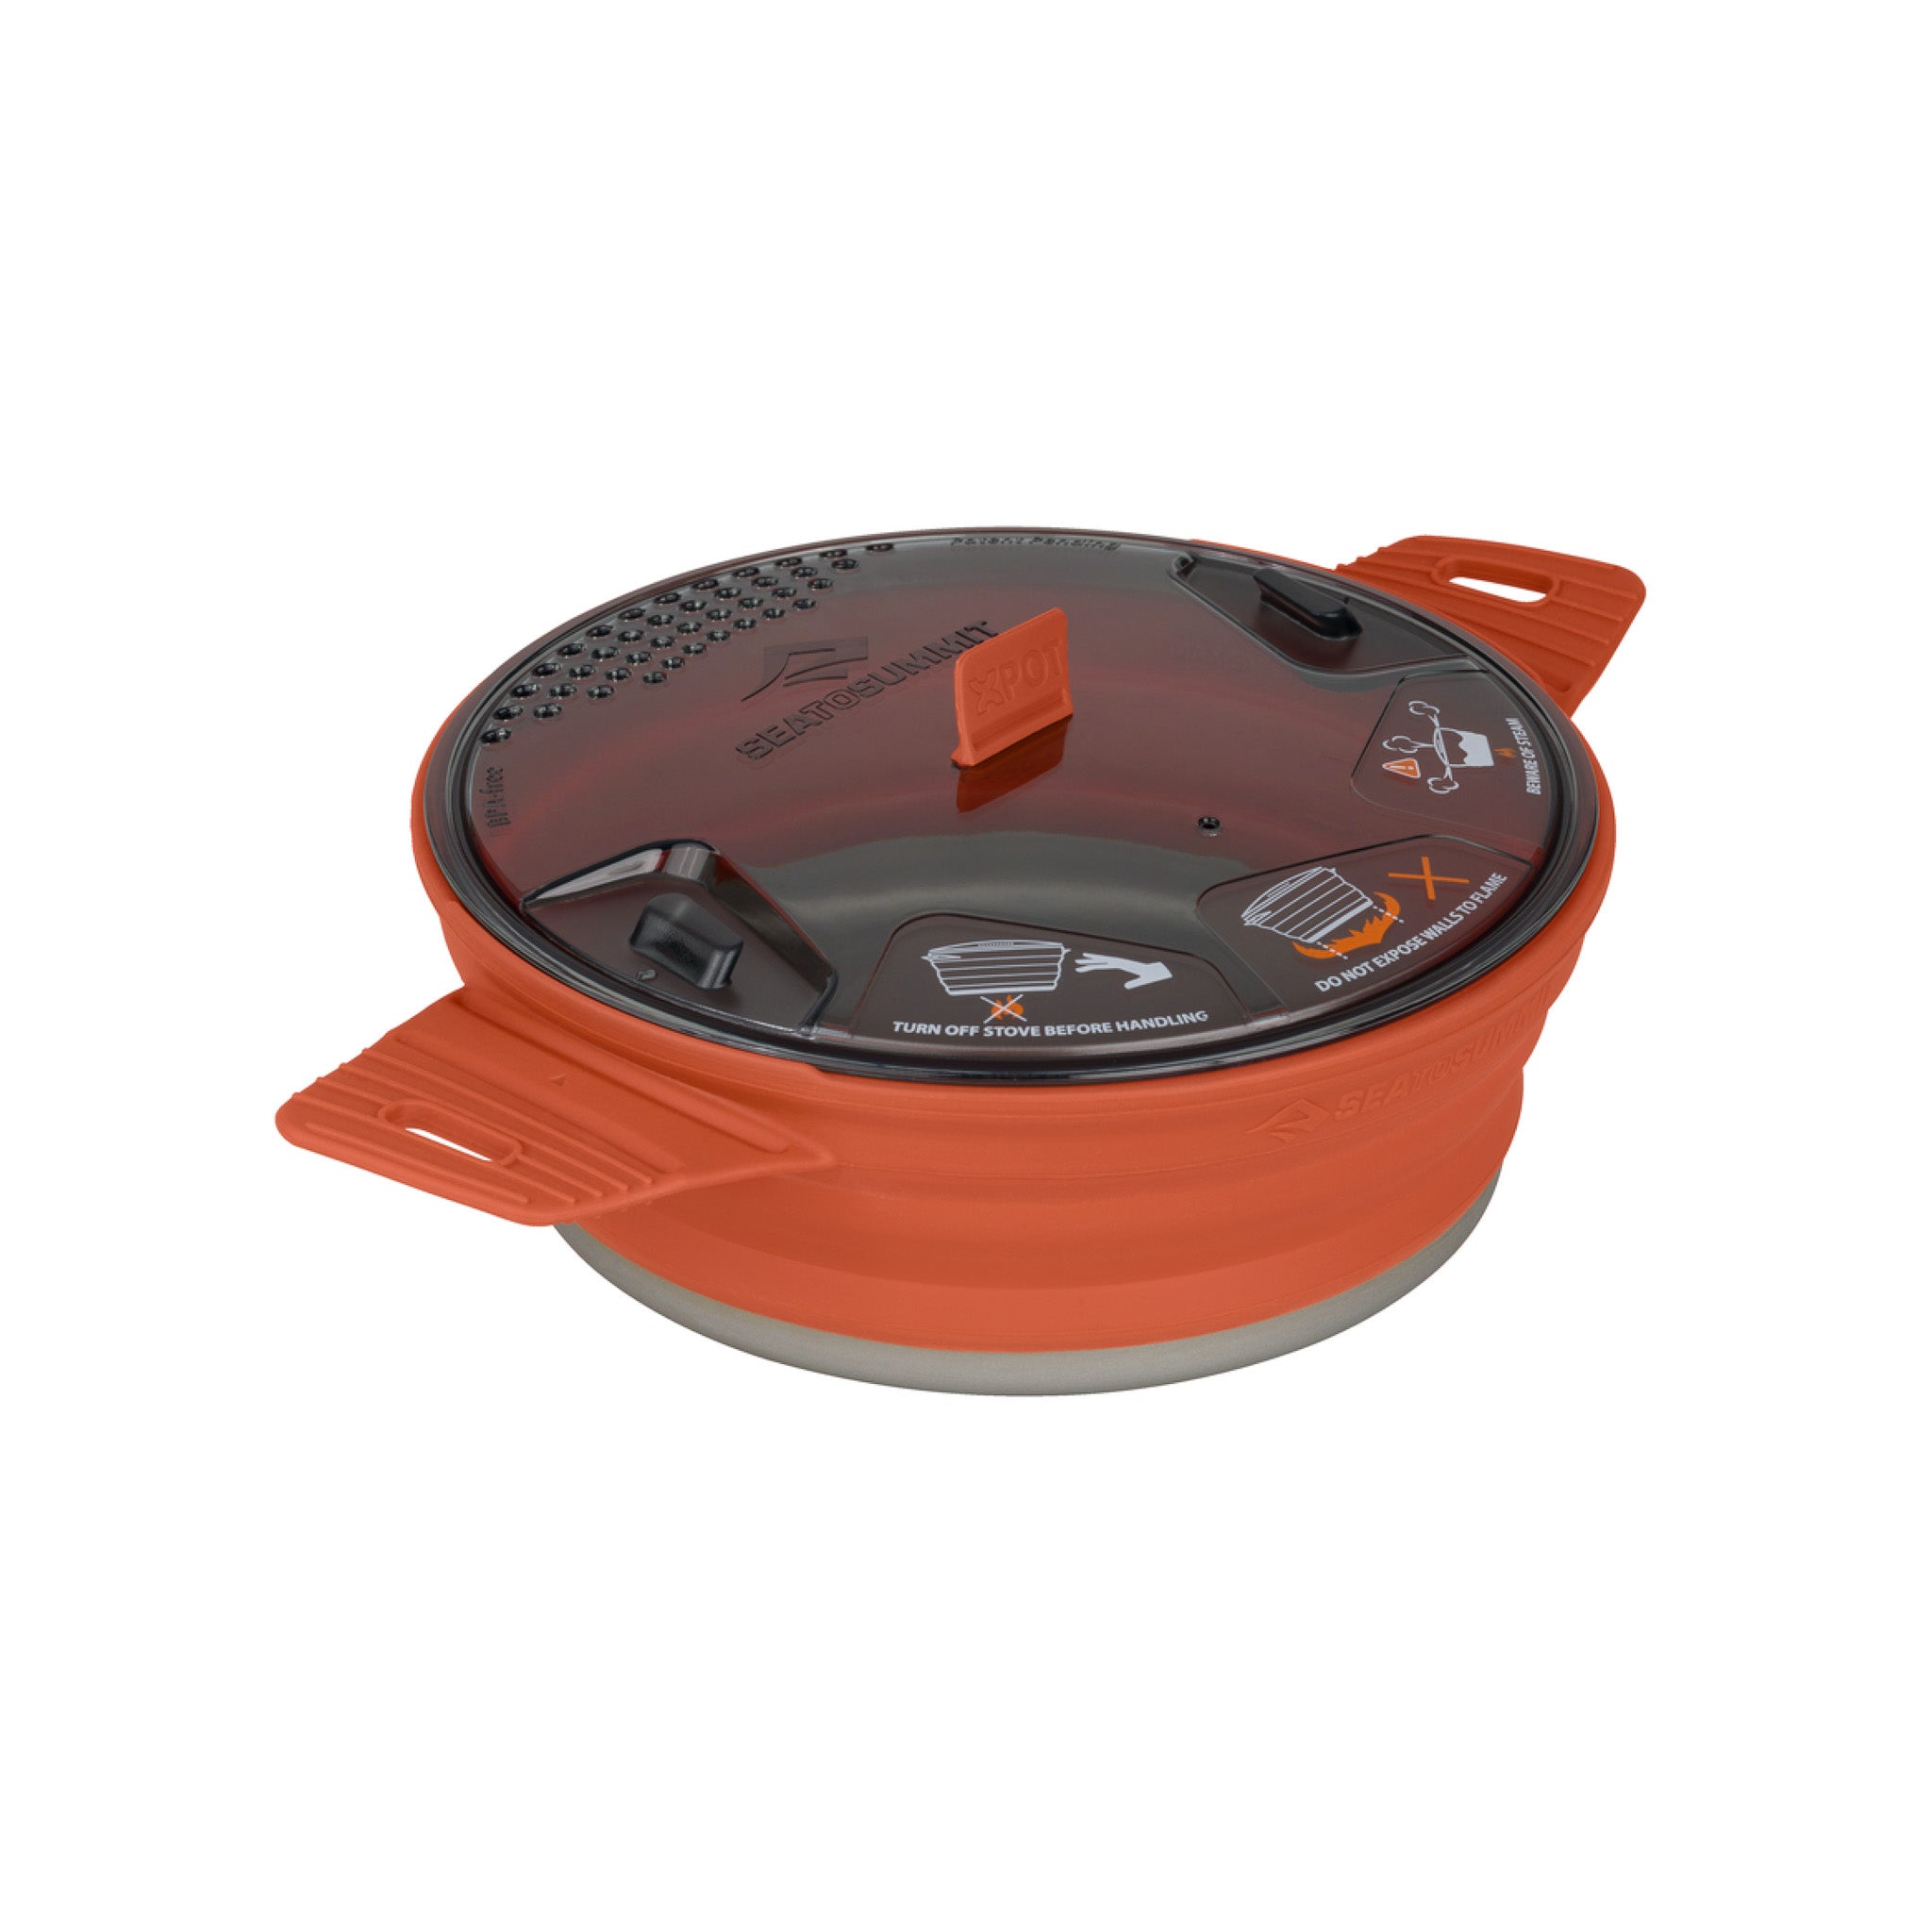 https://cdn.shopify.com/s/files/1/2467/2501/products/Collapsible-camp-cookware-pot-orange-rust-1.4liter.jpg?v=1644817289